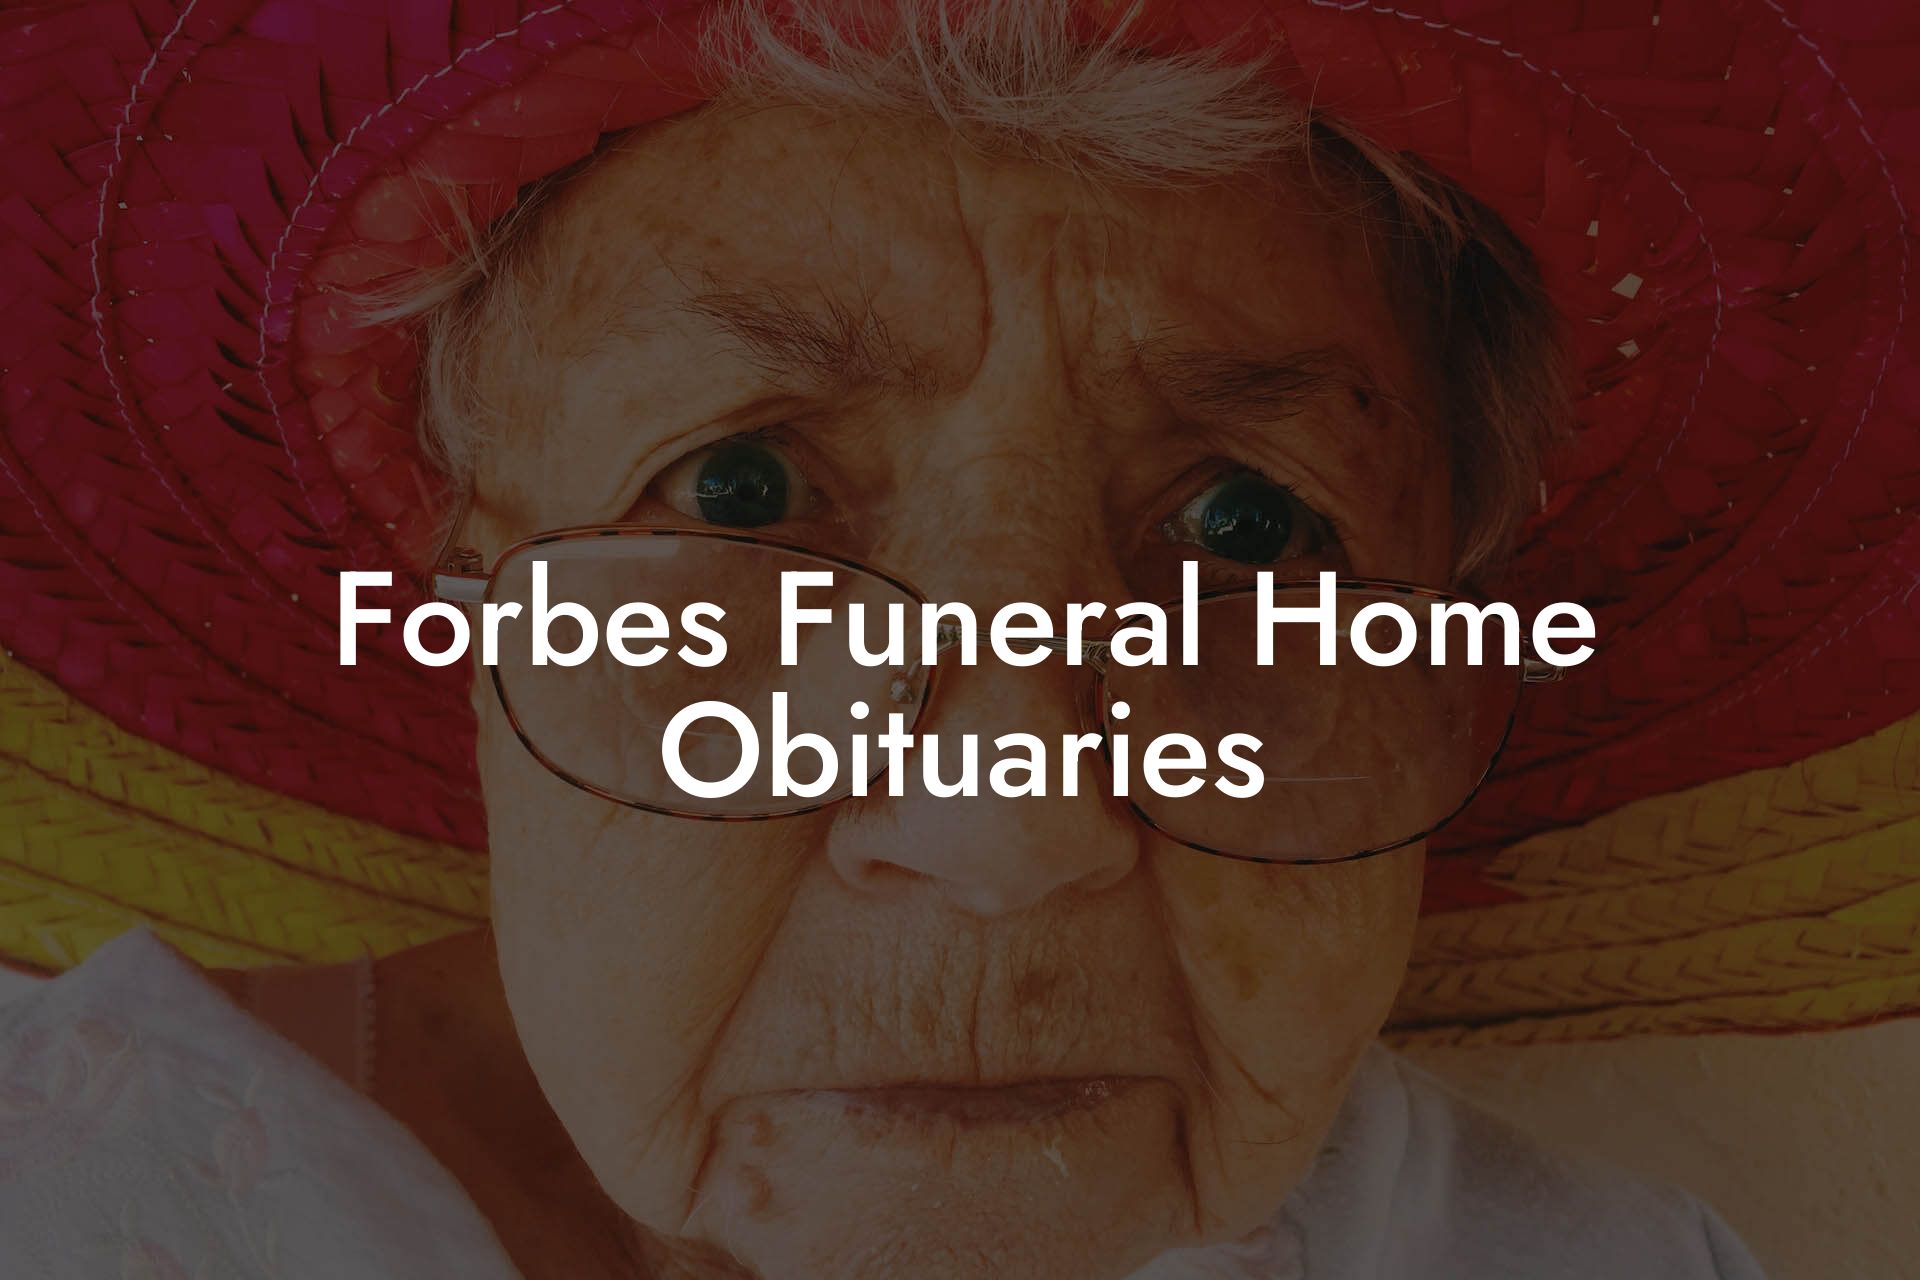 Forbes Funeral Home Obituaries